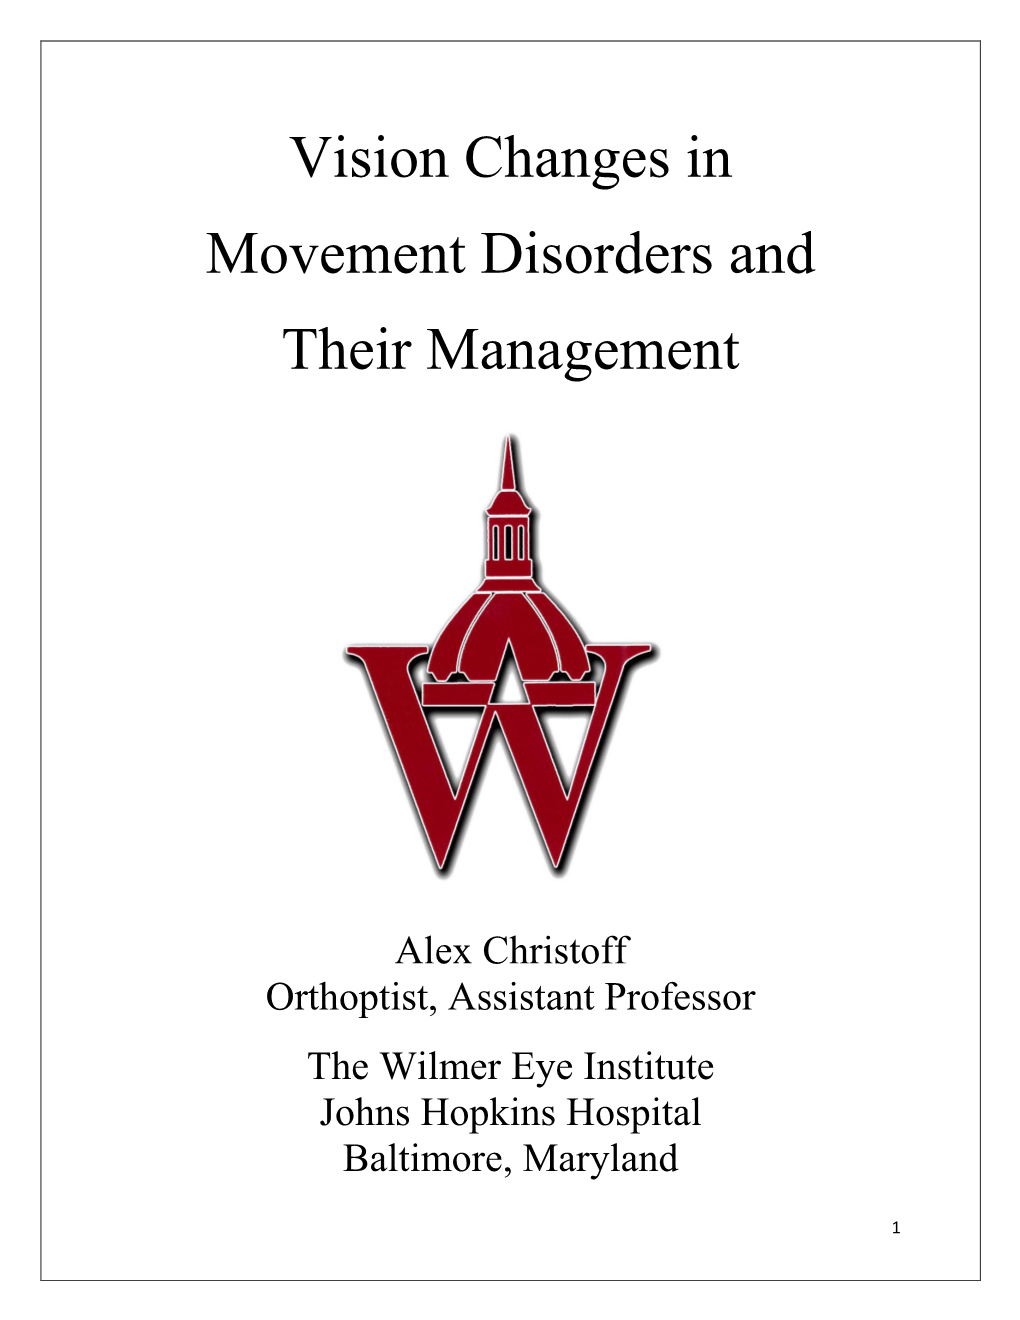 Vision Changes in Movement Disorders and Their Management